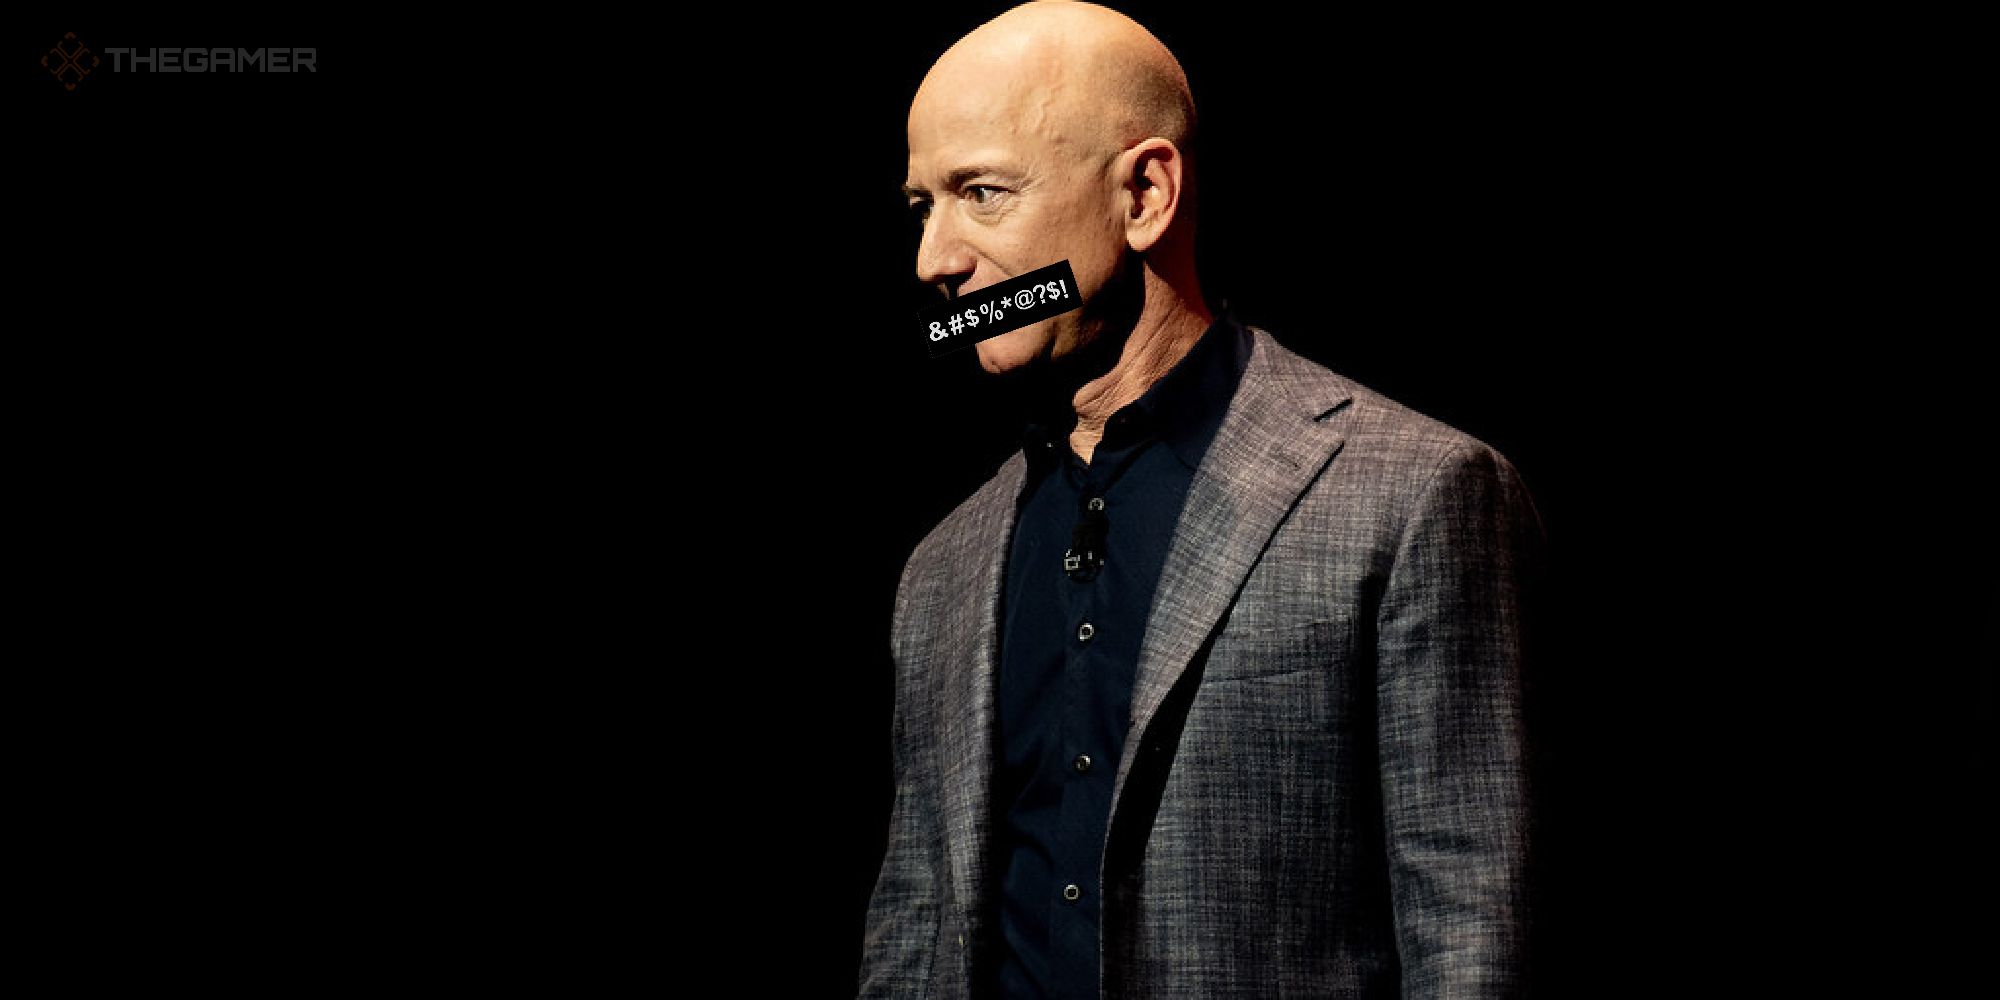 jeff bezos with a censor bar over his mouth